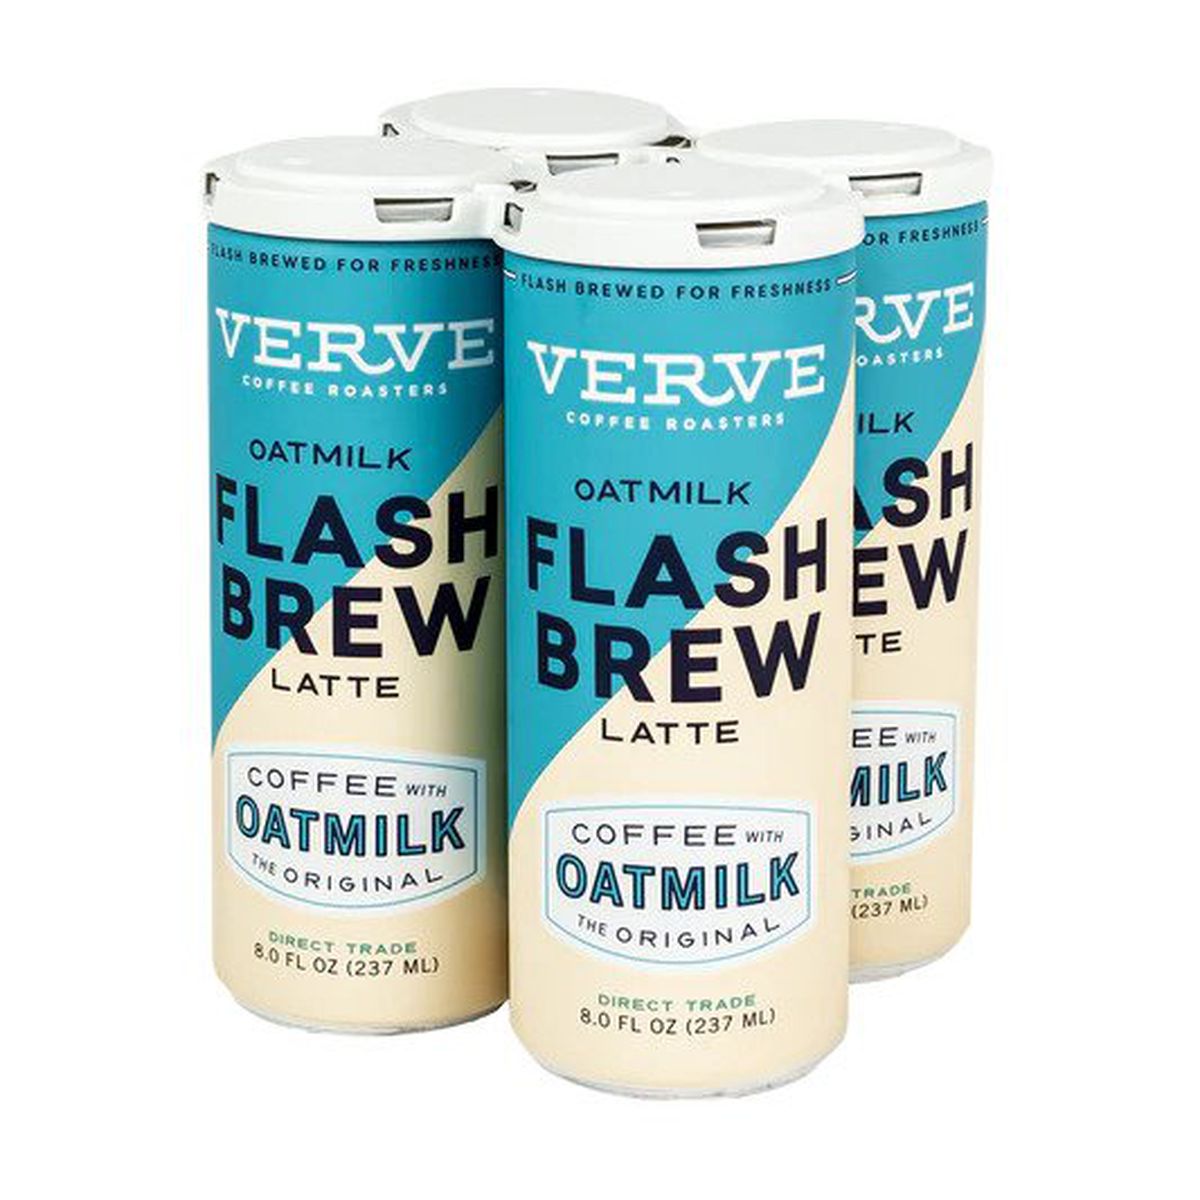 A four-pack of lattes